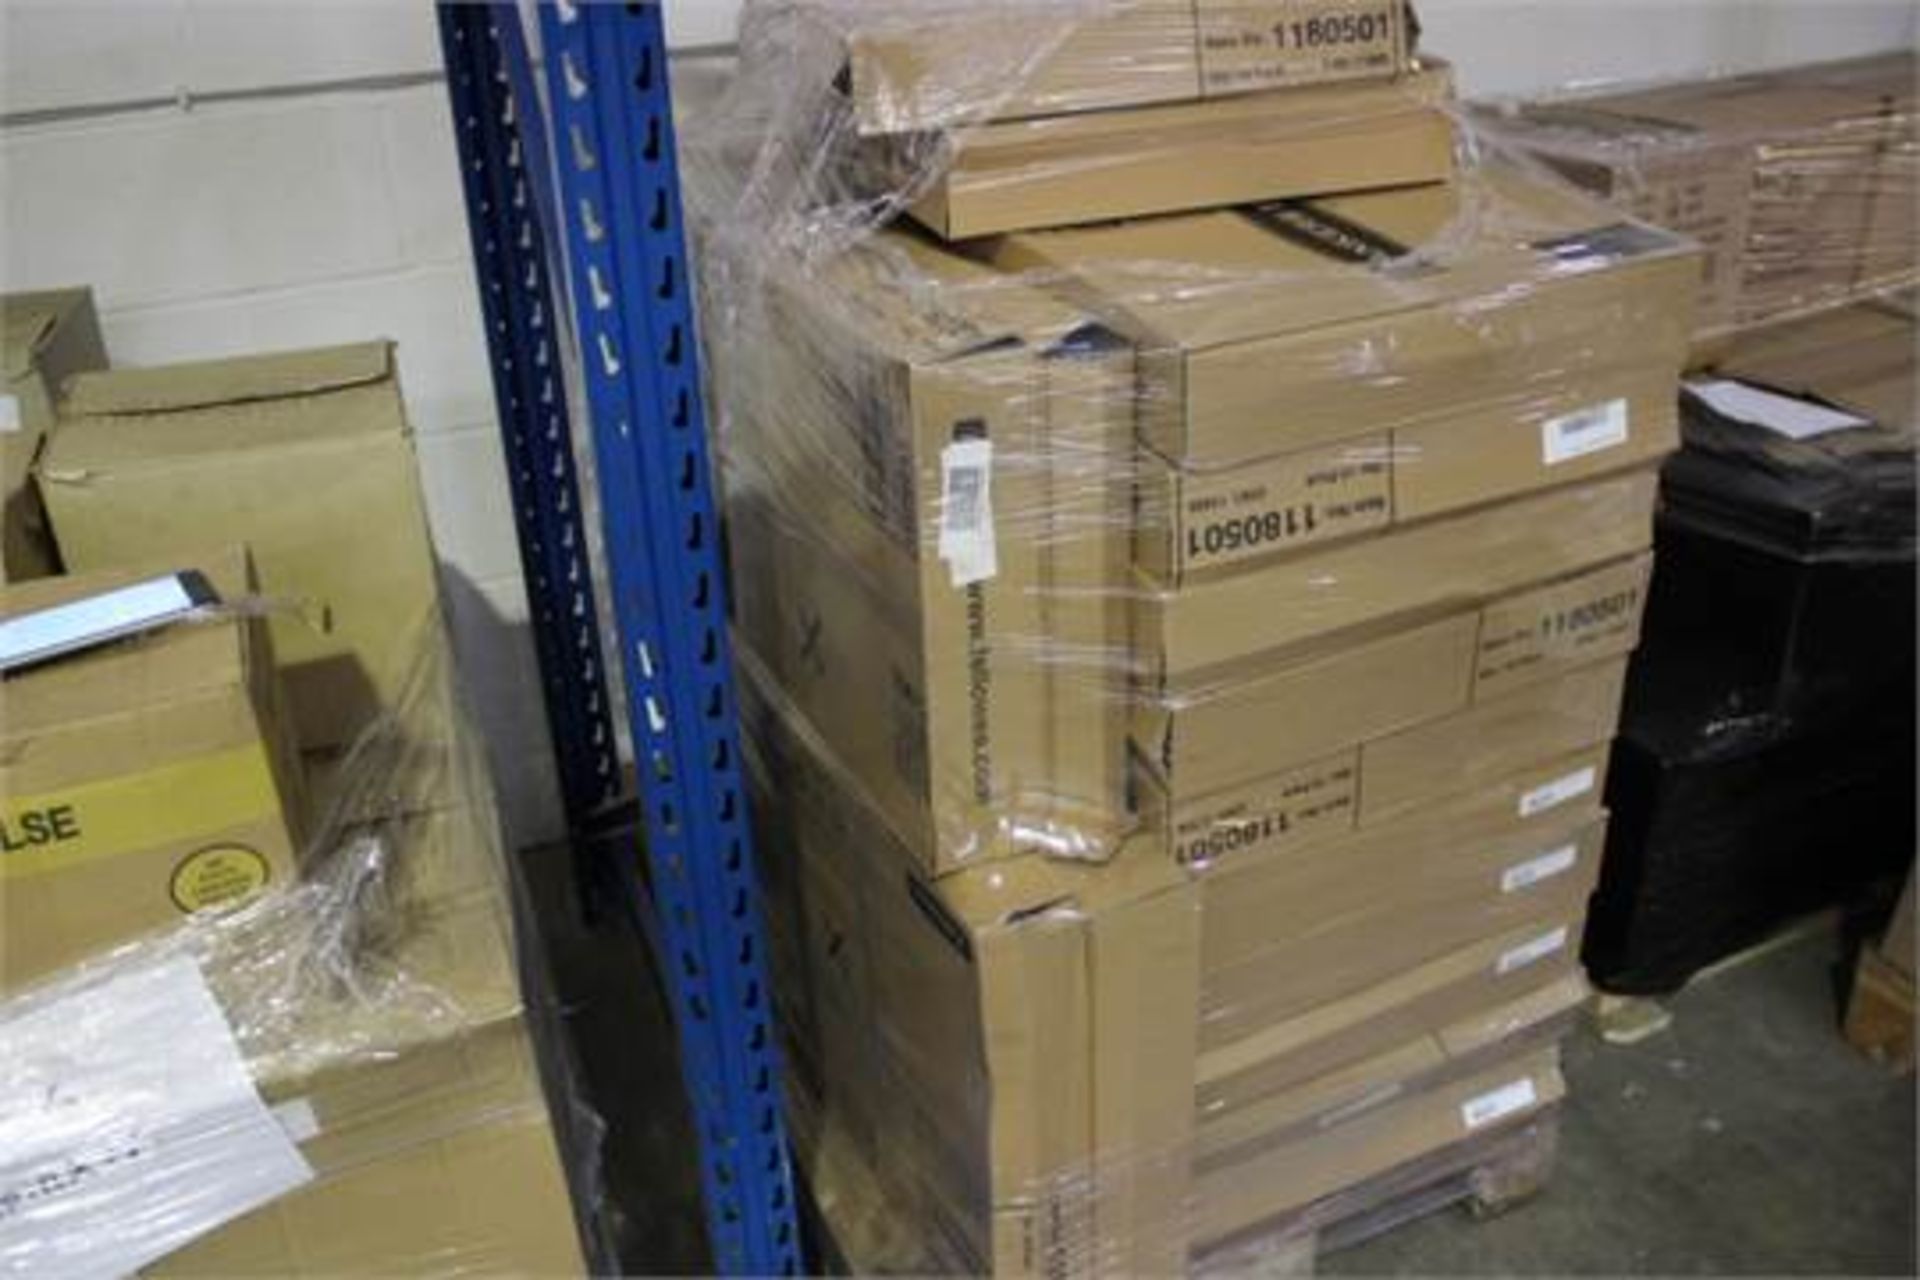 1 x Pallet of Fellowes Bankers Storage Packs - 40 Packs - Image 2 of 2